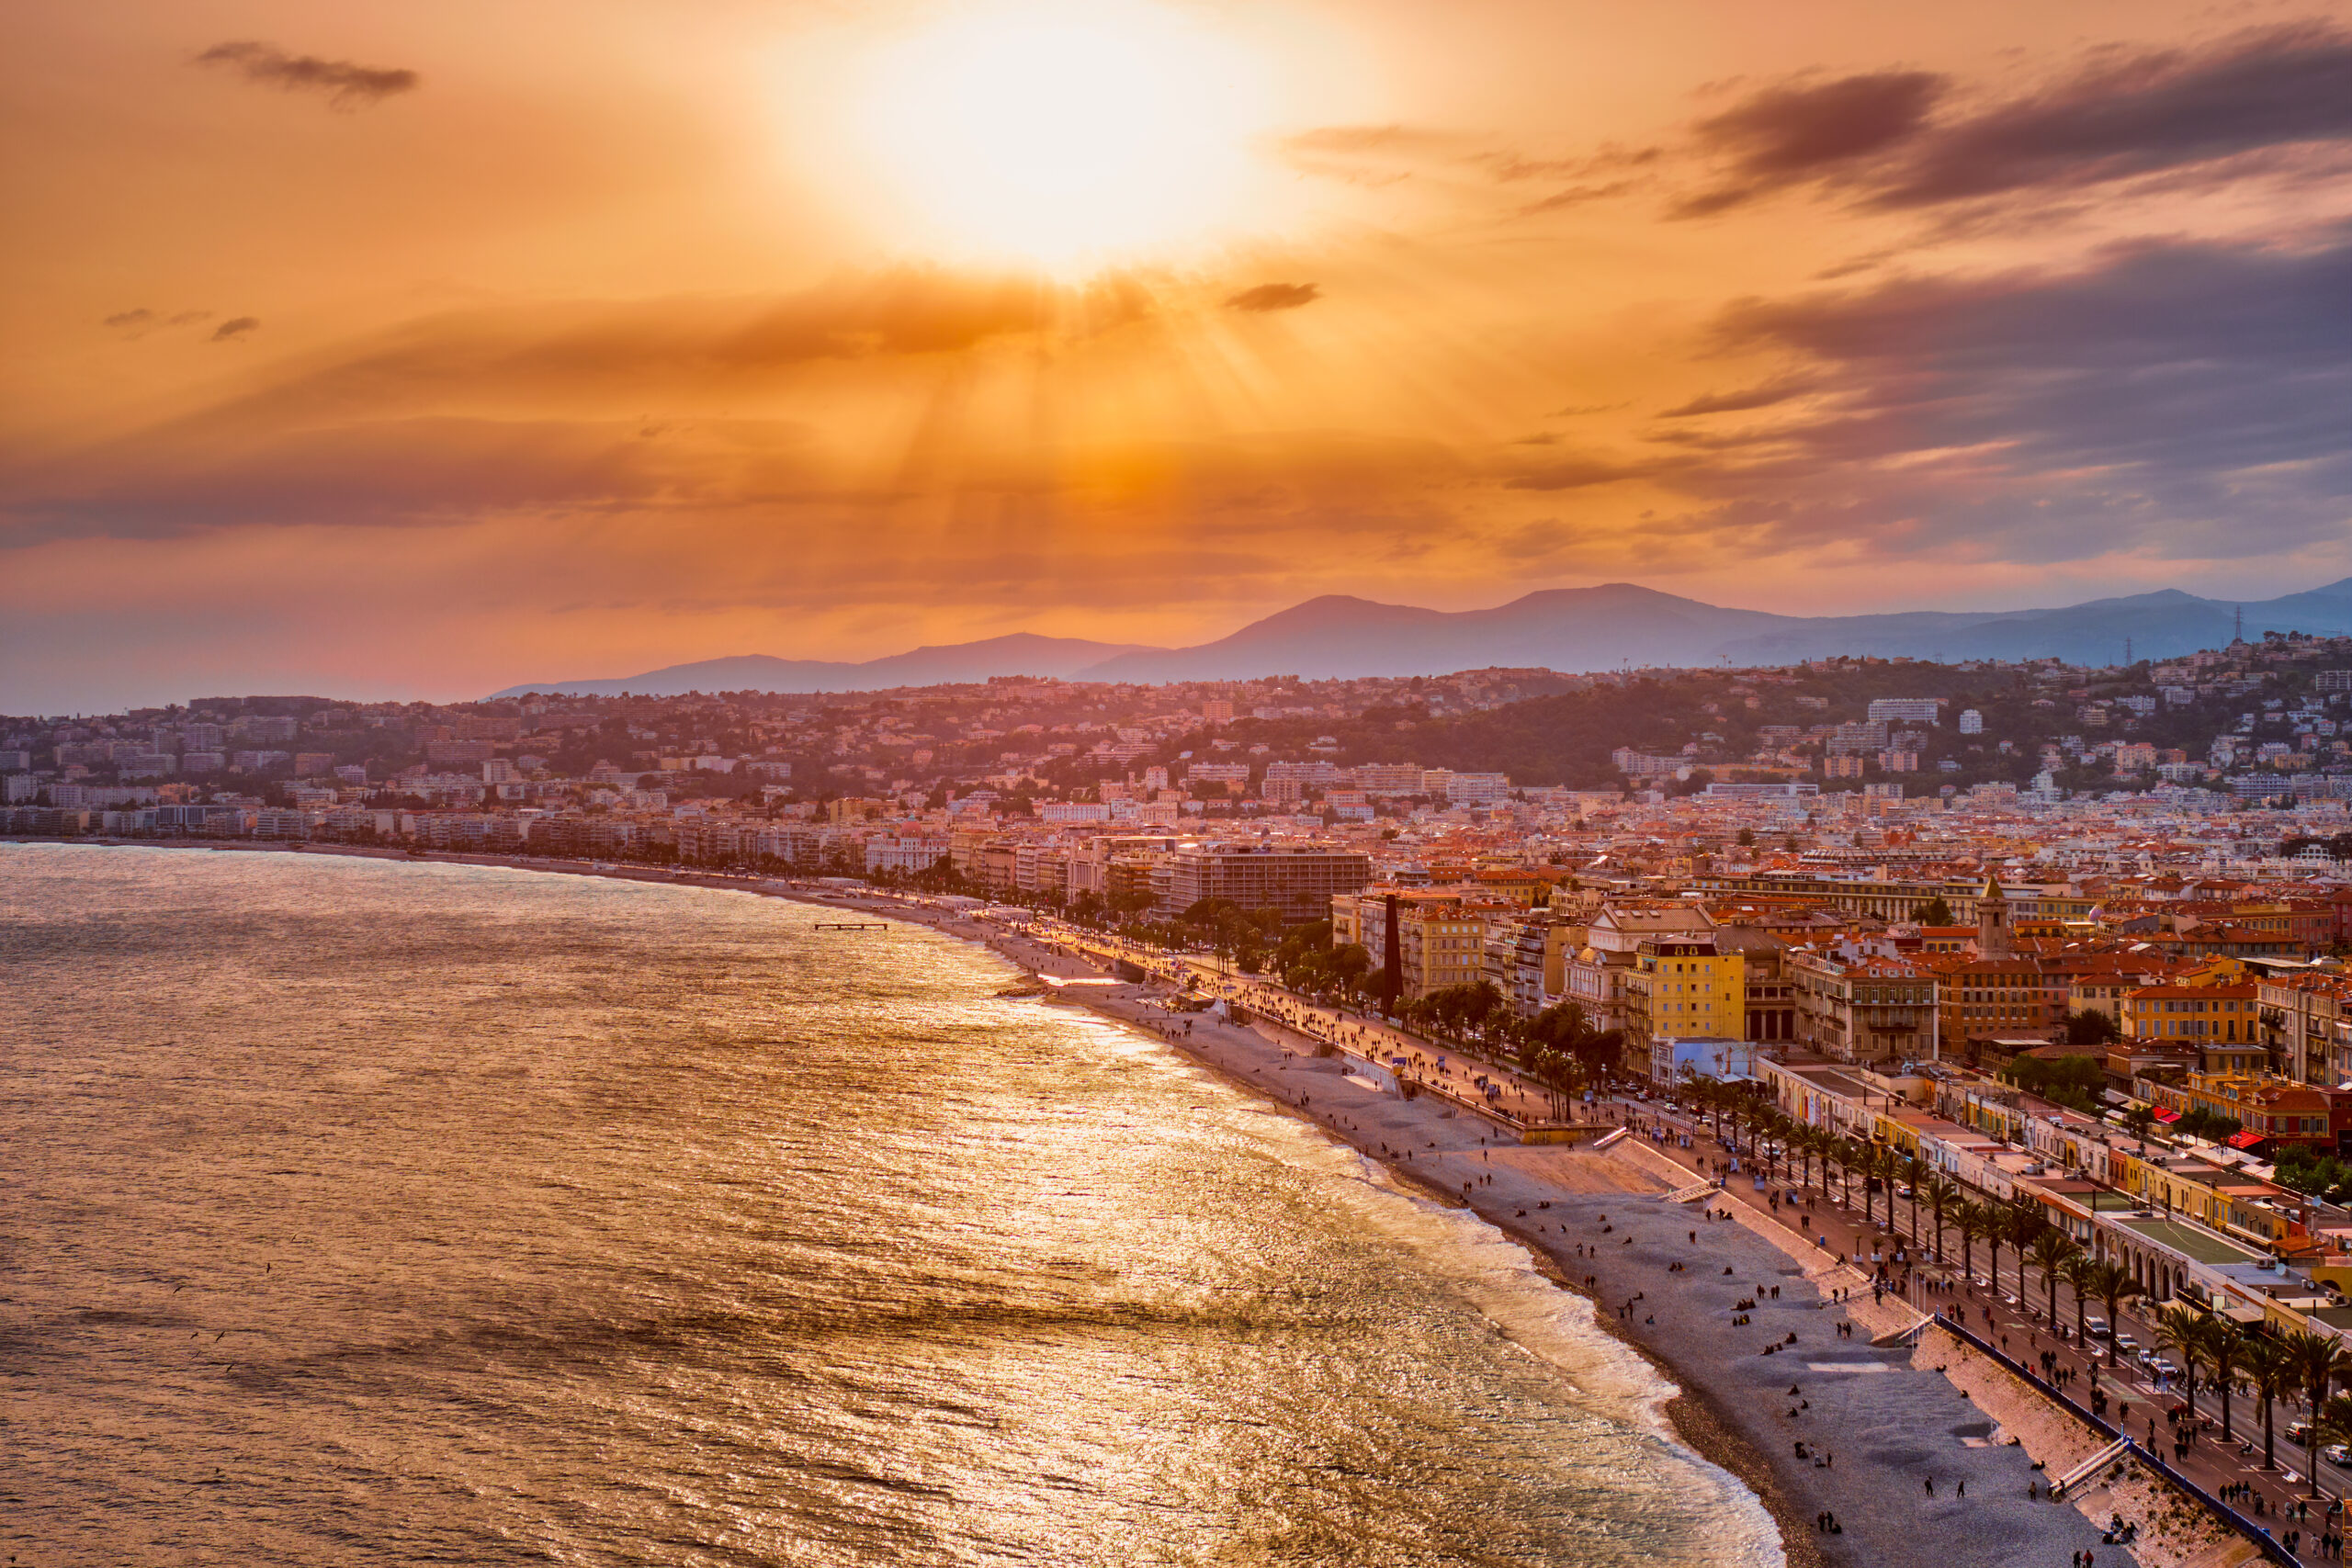 picturesque-view-of-nice-france-on-sunset-2021-09-04-09-33-37-utc-scaled.jpg